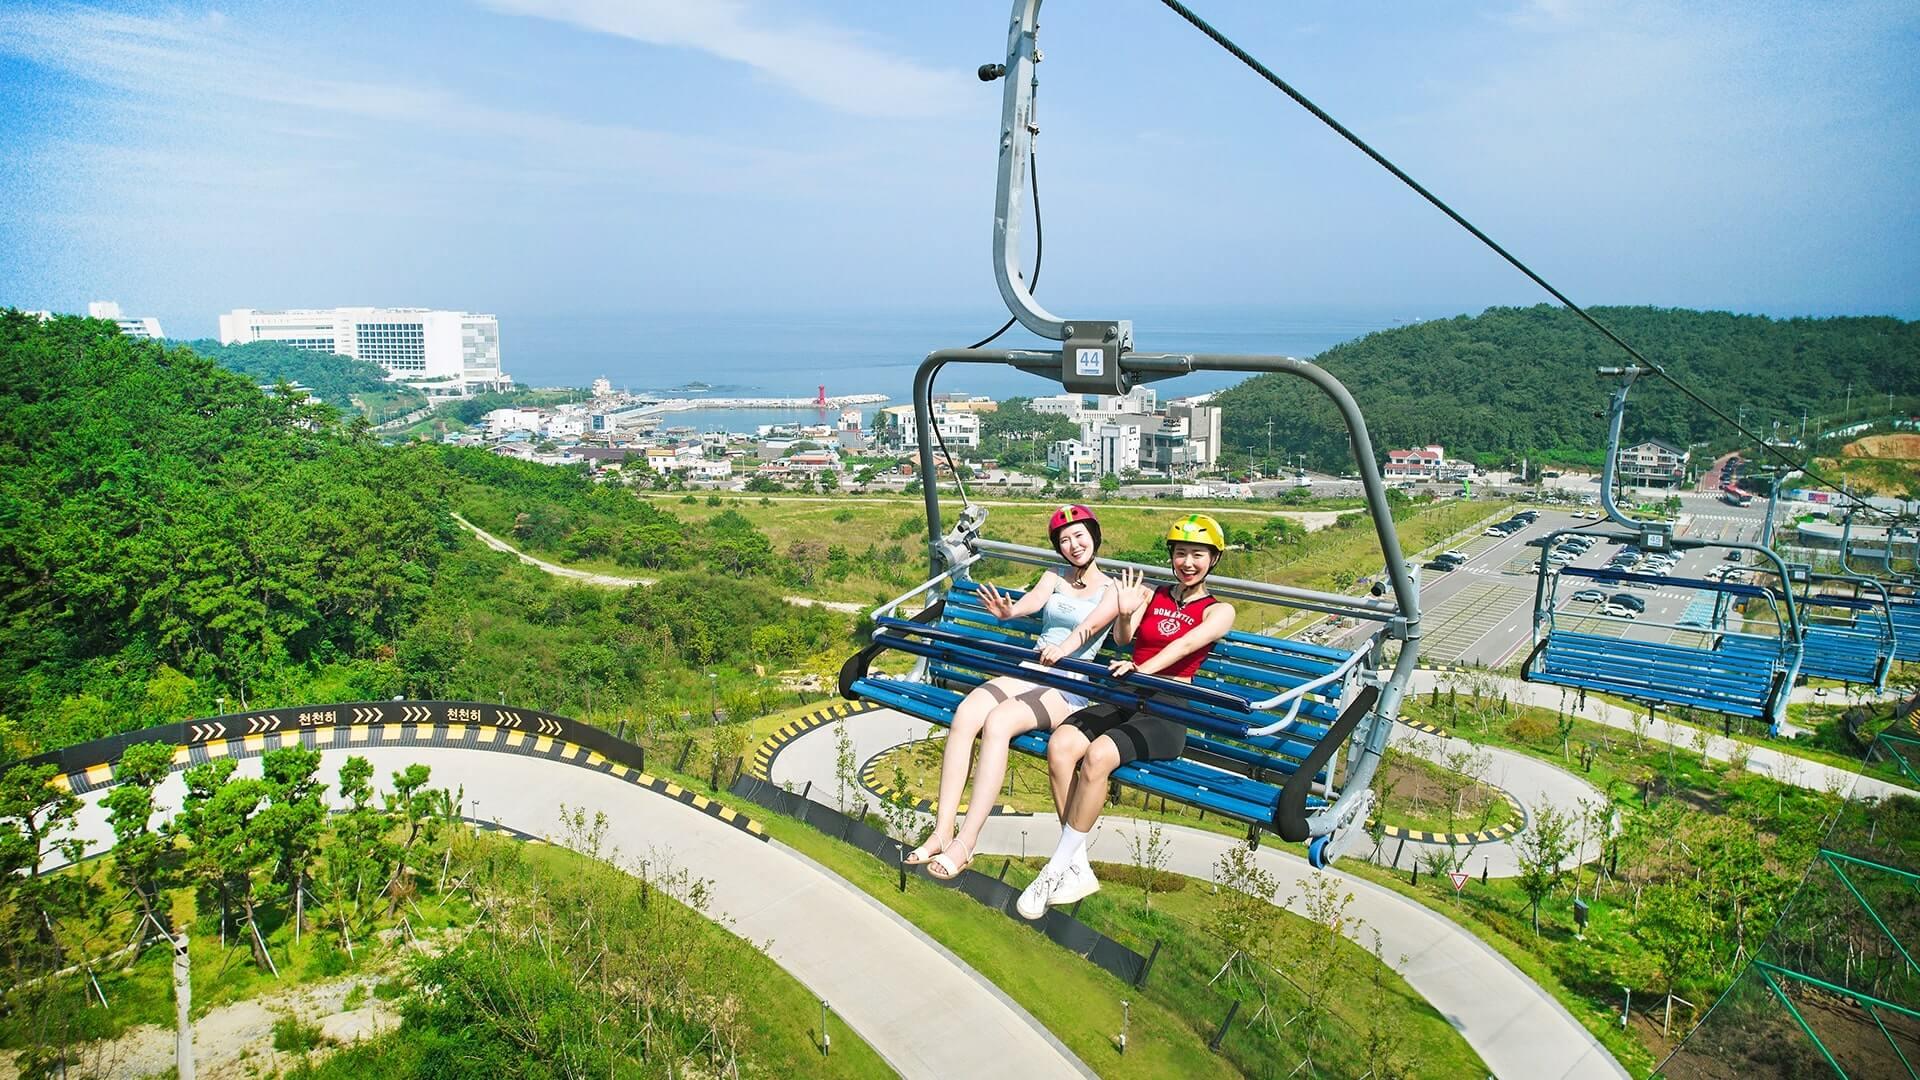 Two women ride the Skyline Luge Busan chairlift.